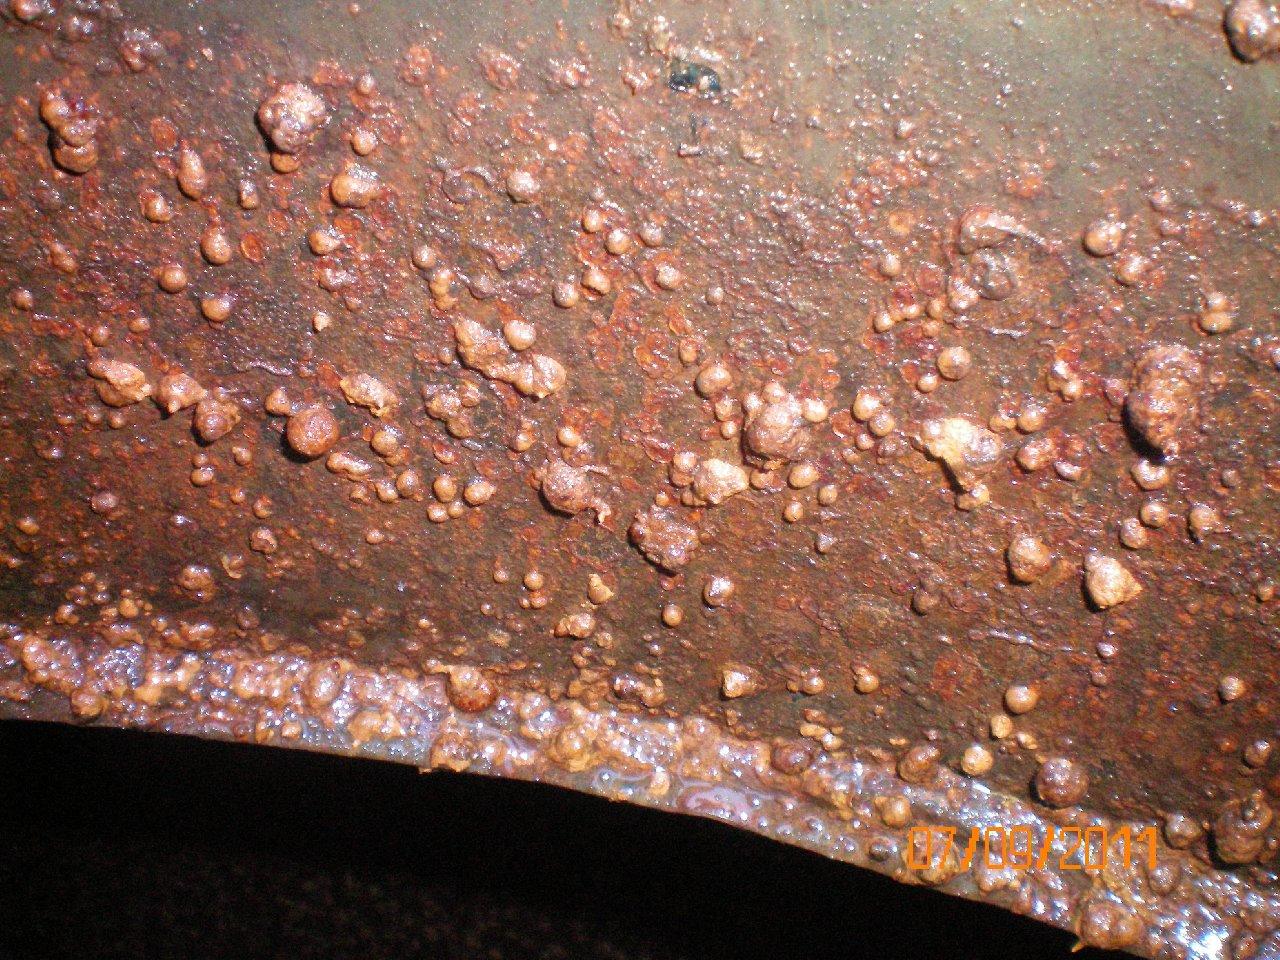 Corrosion craters.